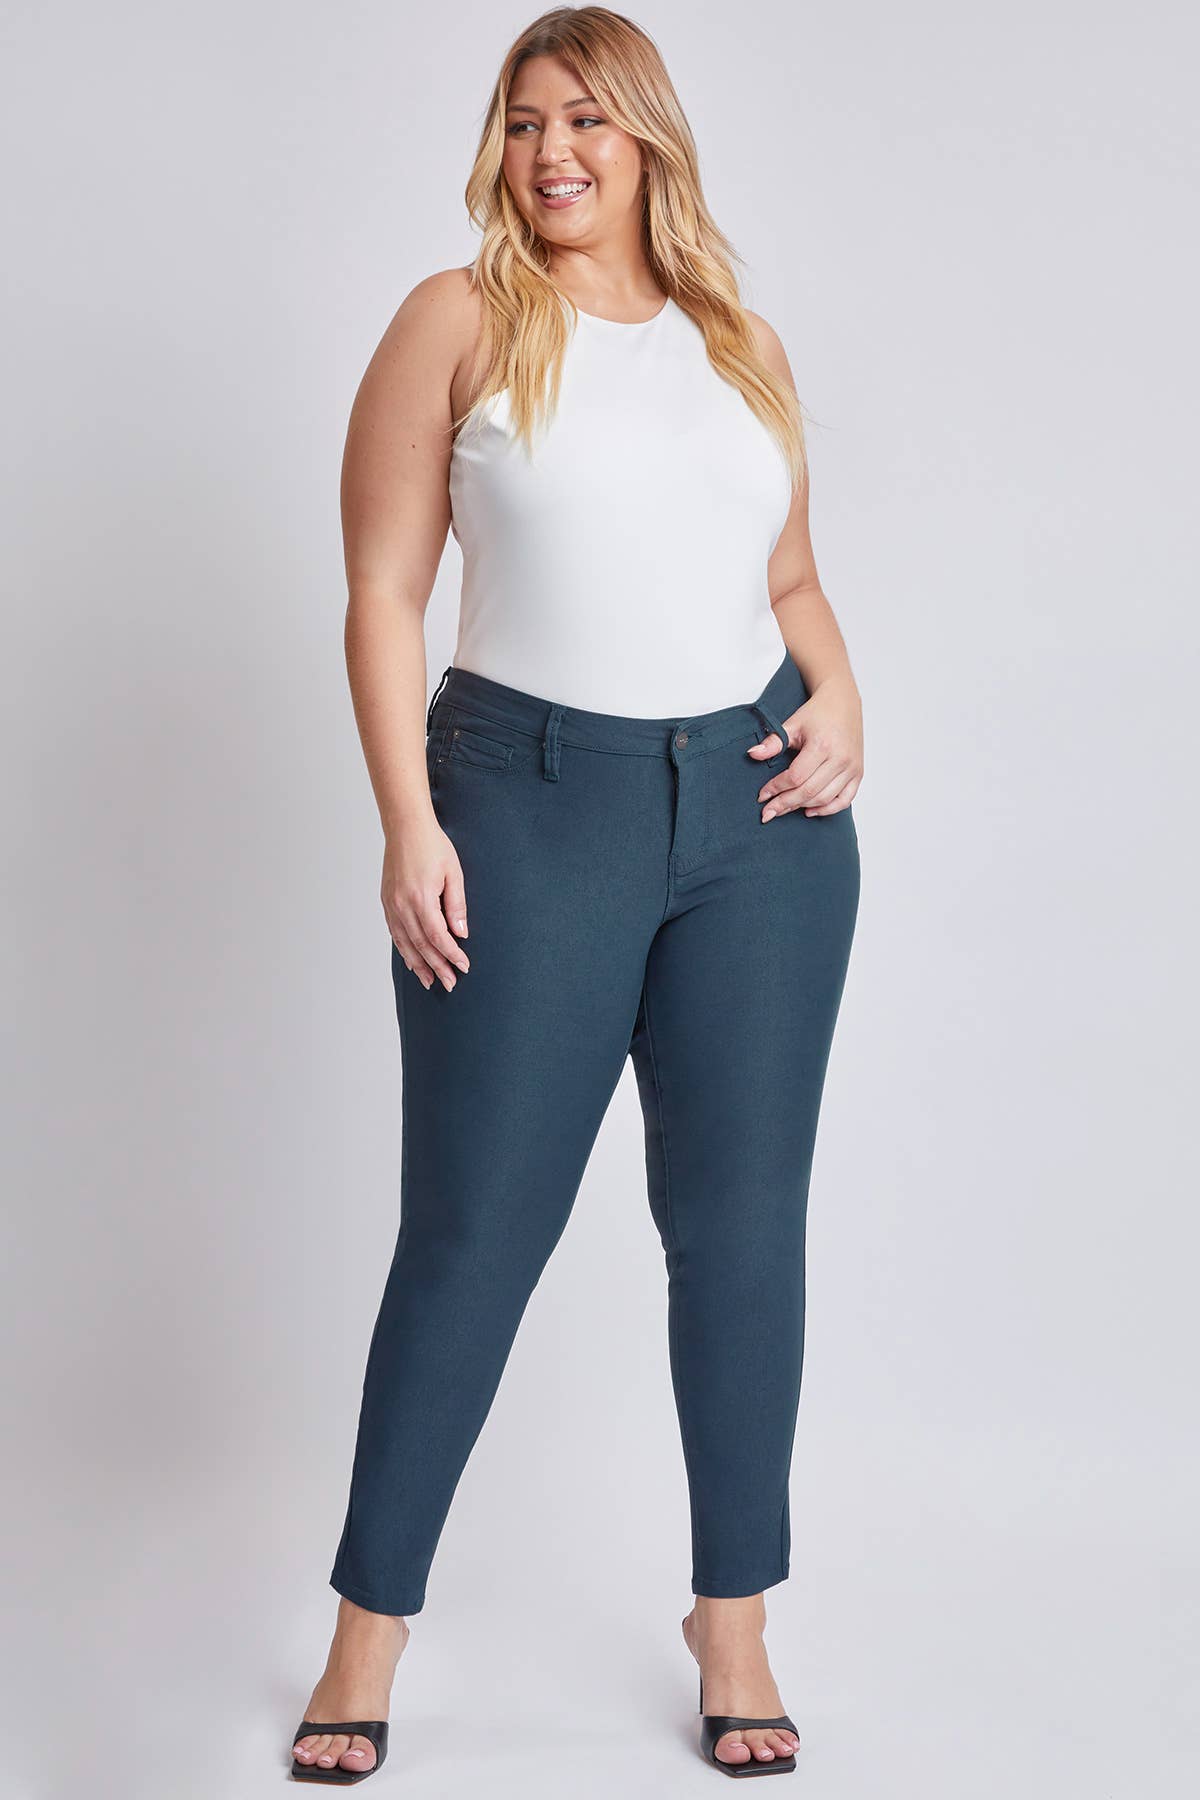 Missy Plus Size Hyperstretch Skinny Jean: Pacific Spring-Summer YMI